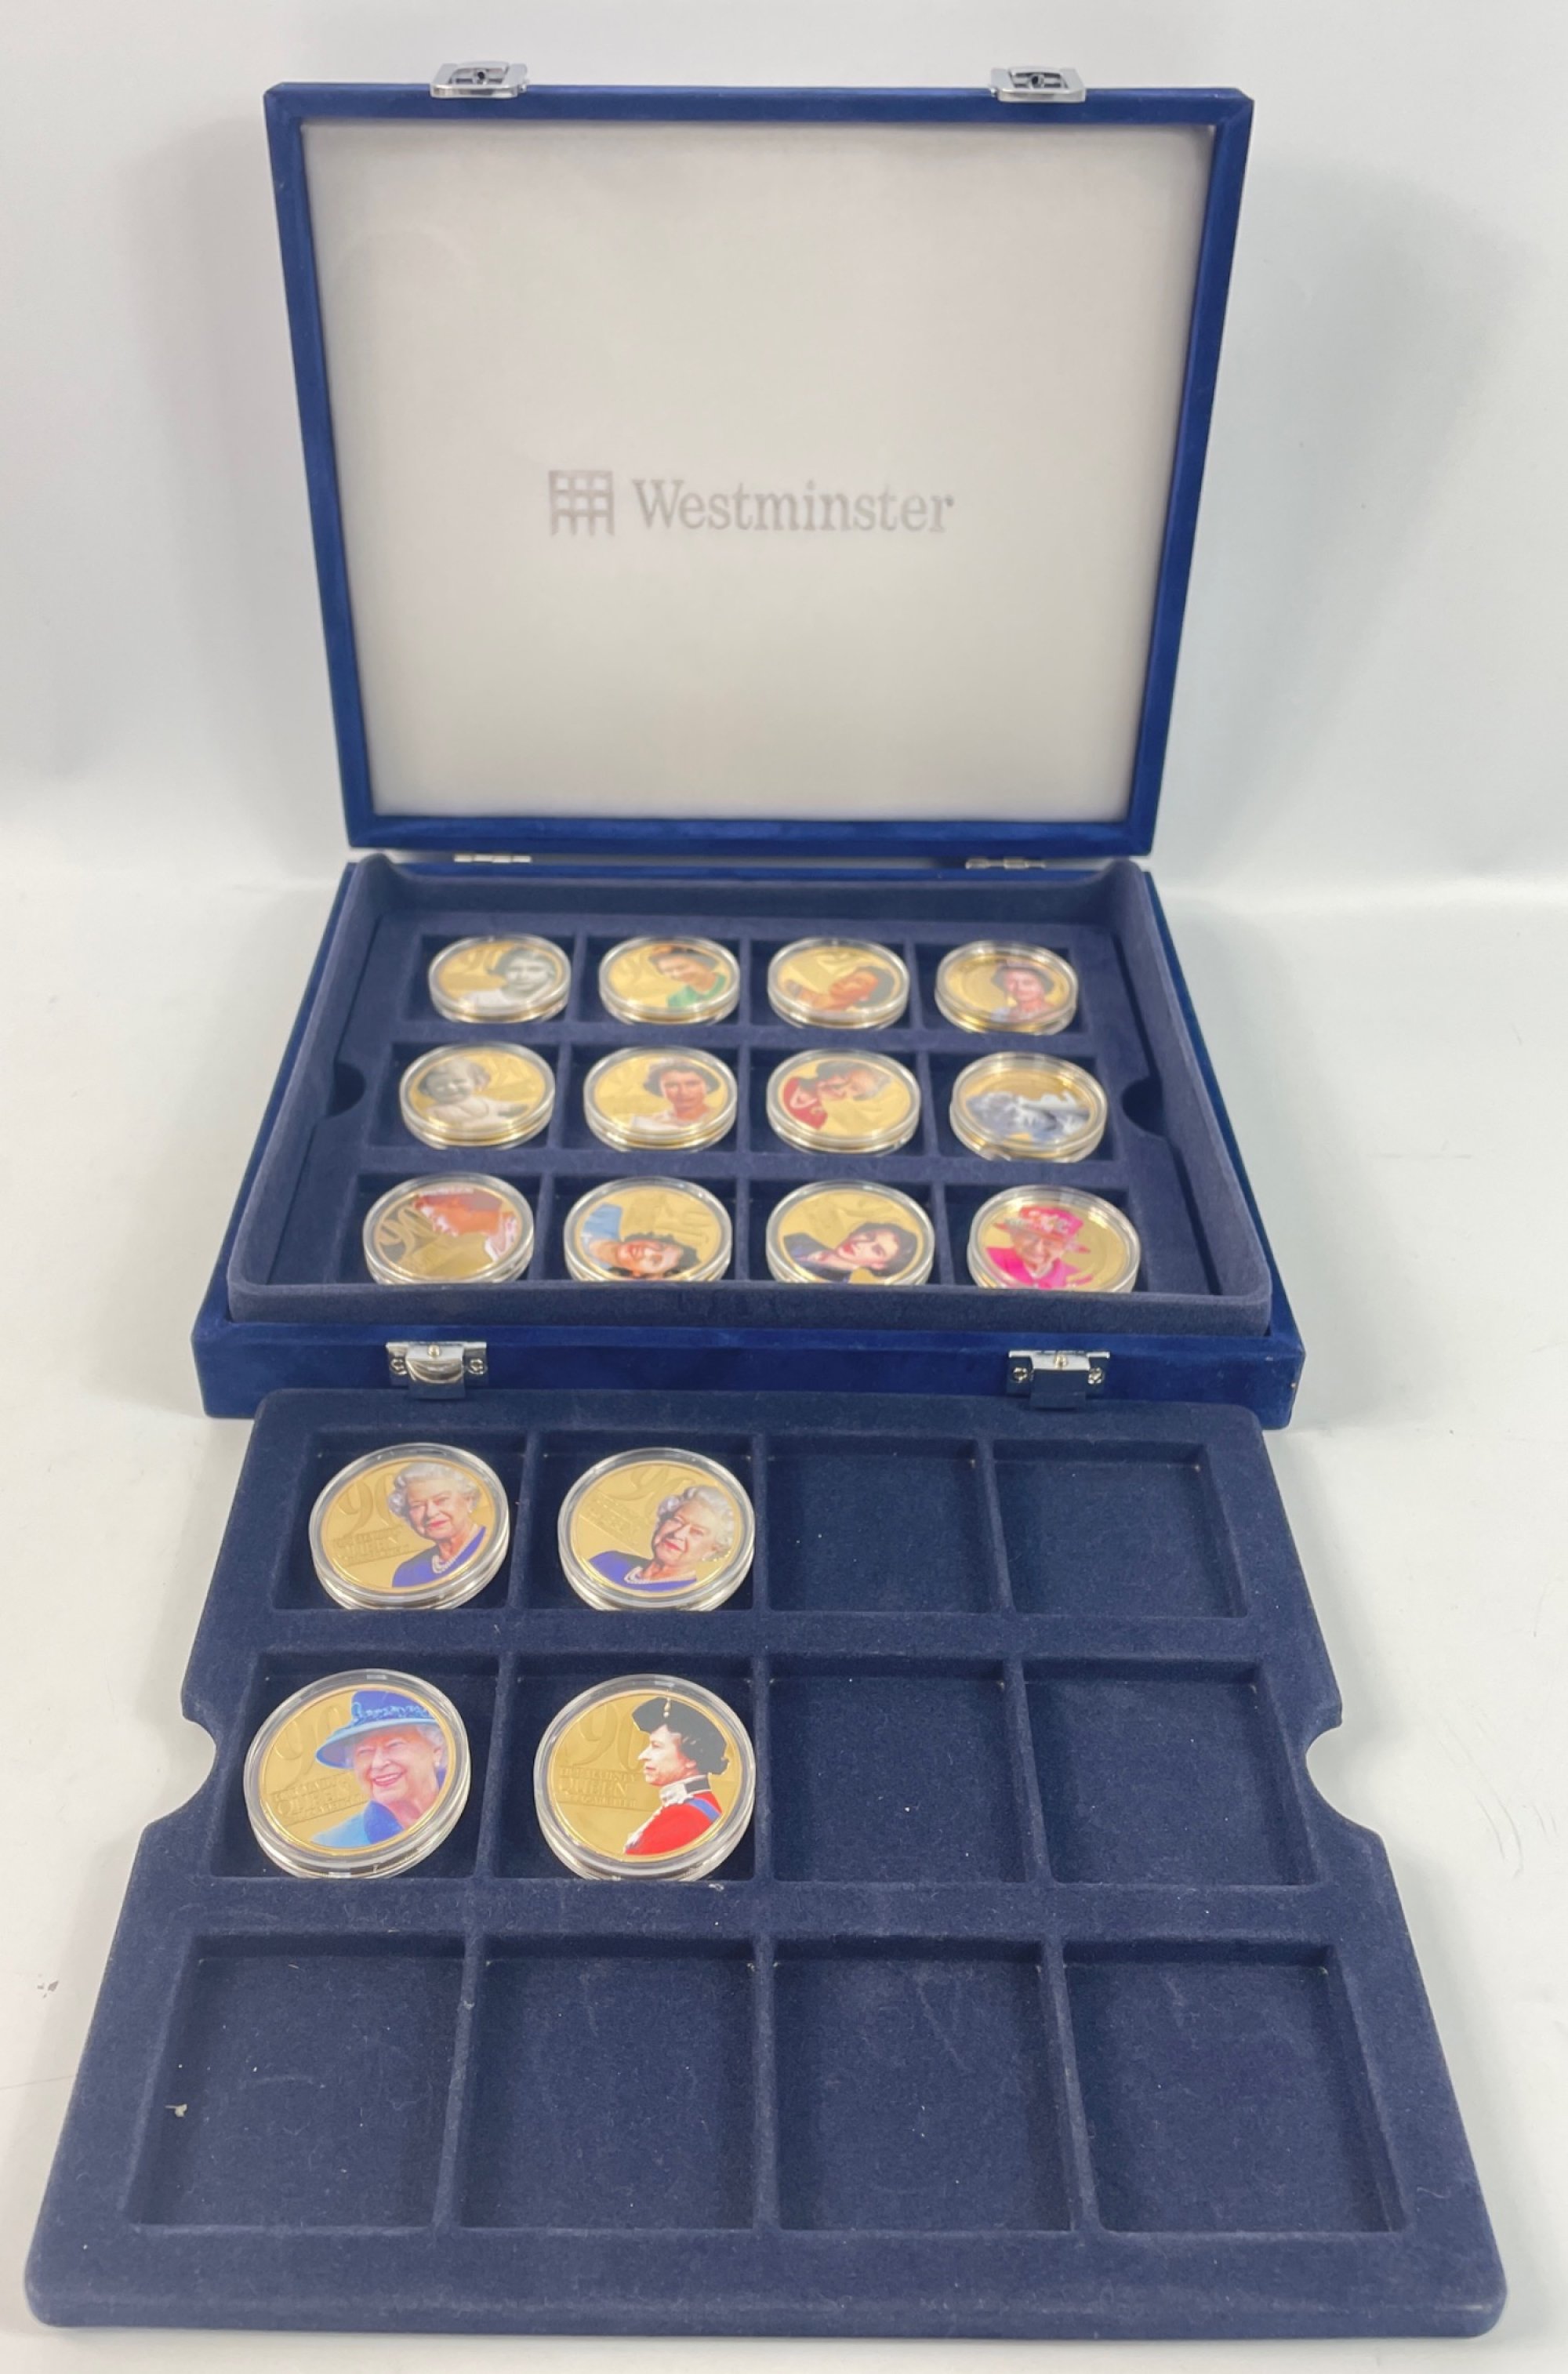 A Queen Elizabeth II 90th birthday collection of coins - 16 Commemorative coin set within an